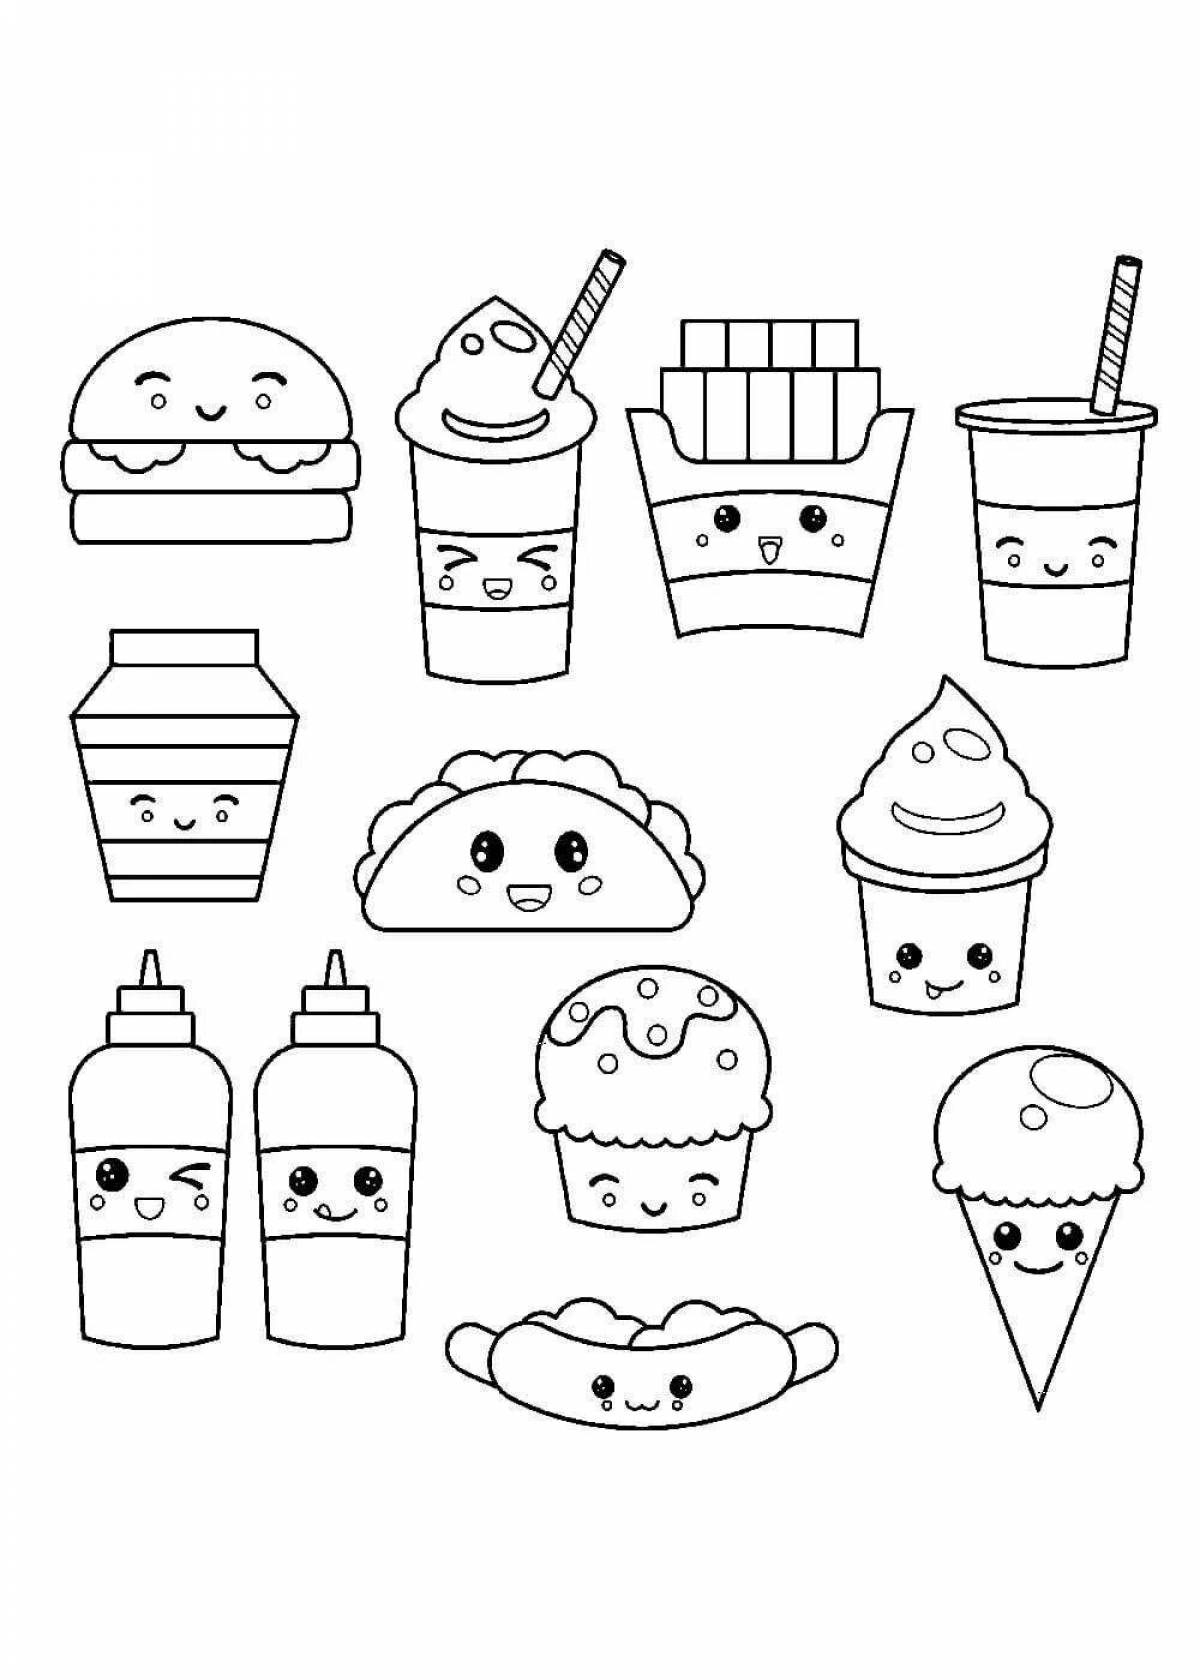 Fancy sticker coloring pages